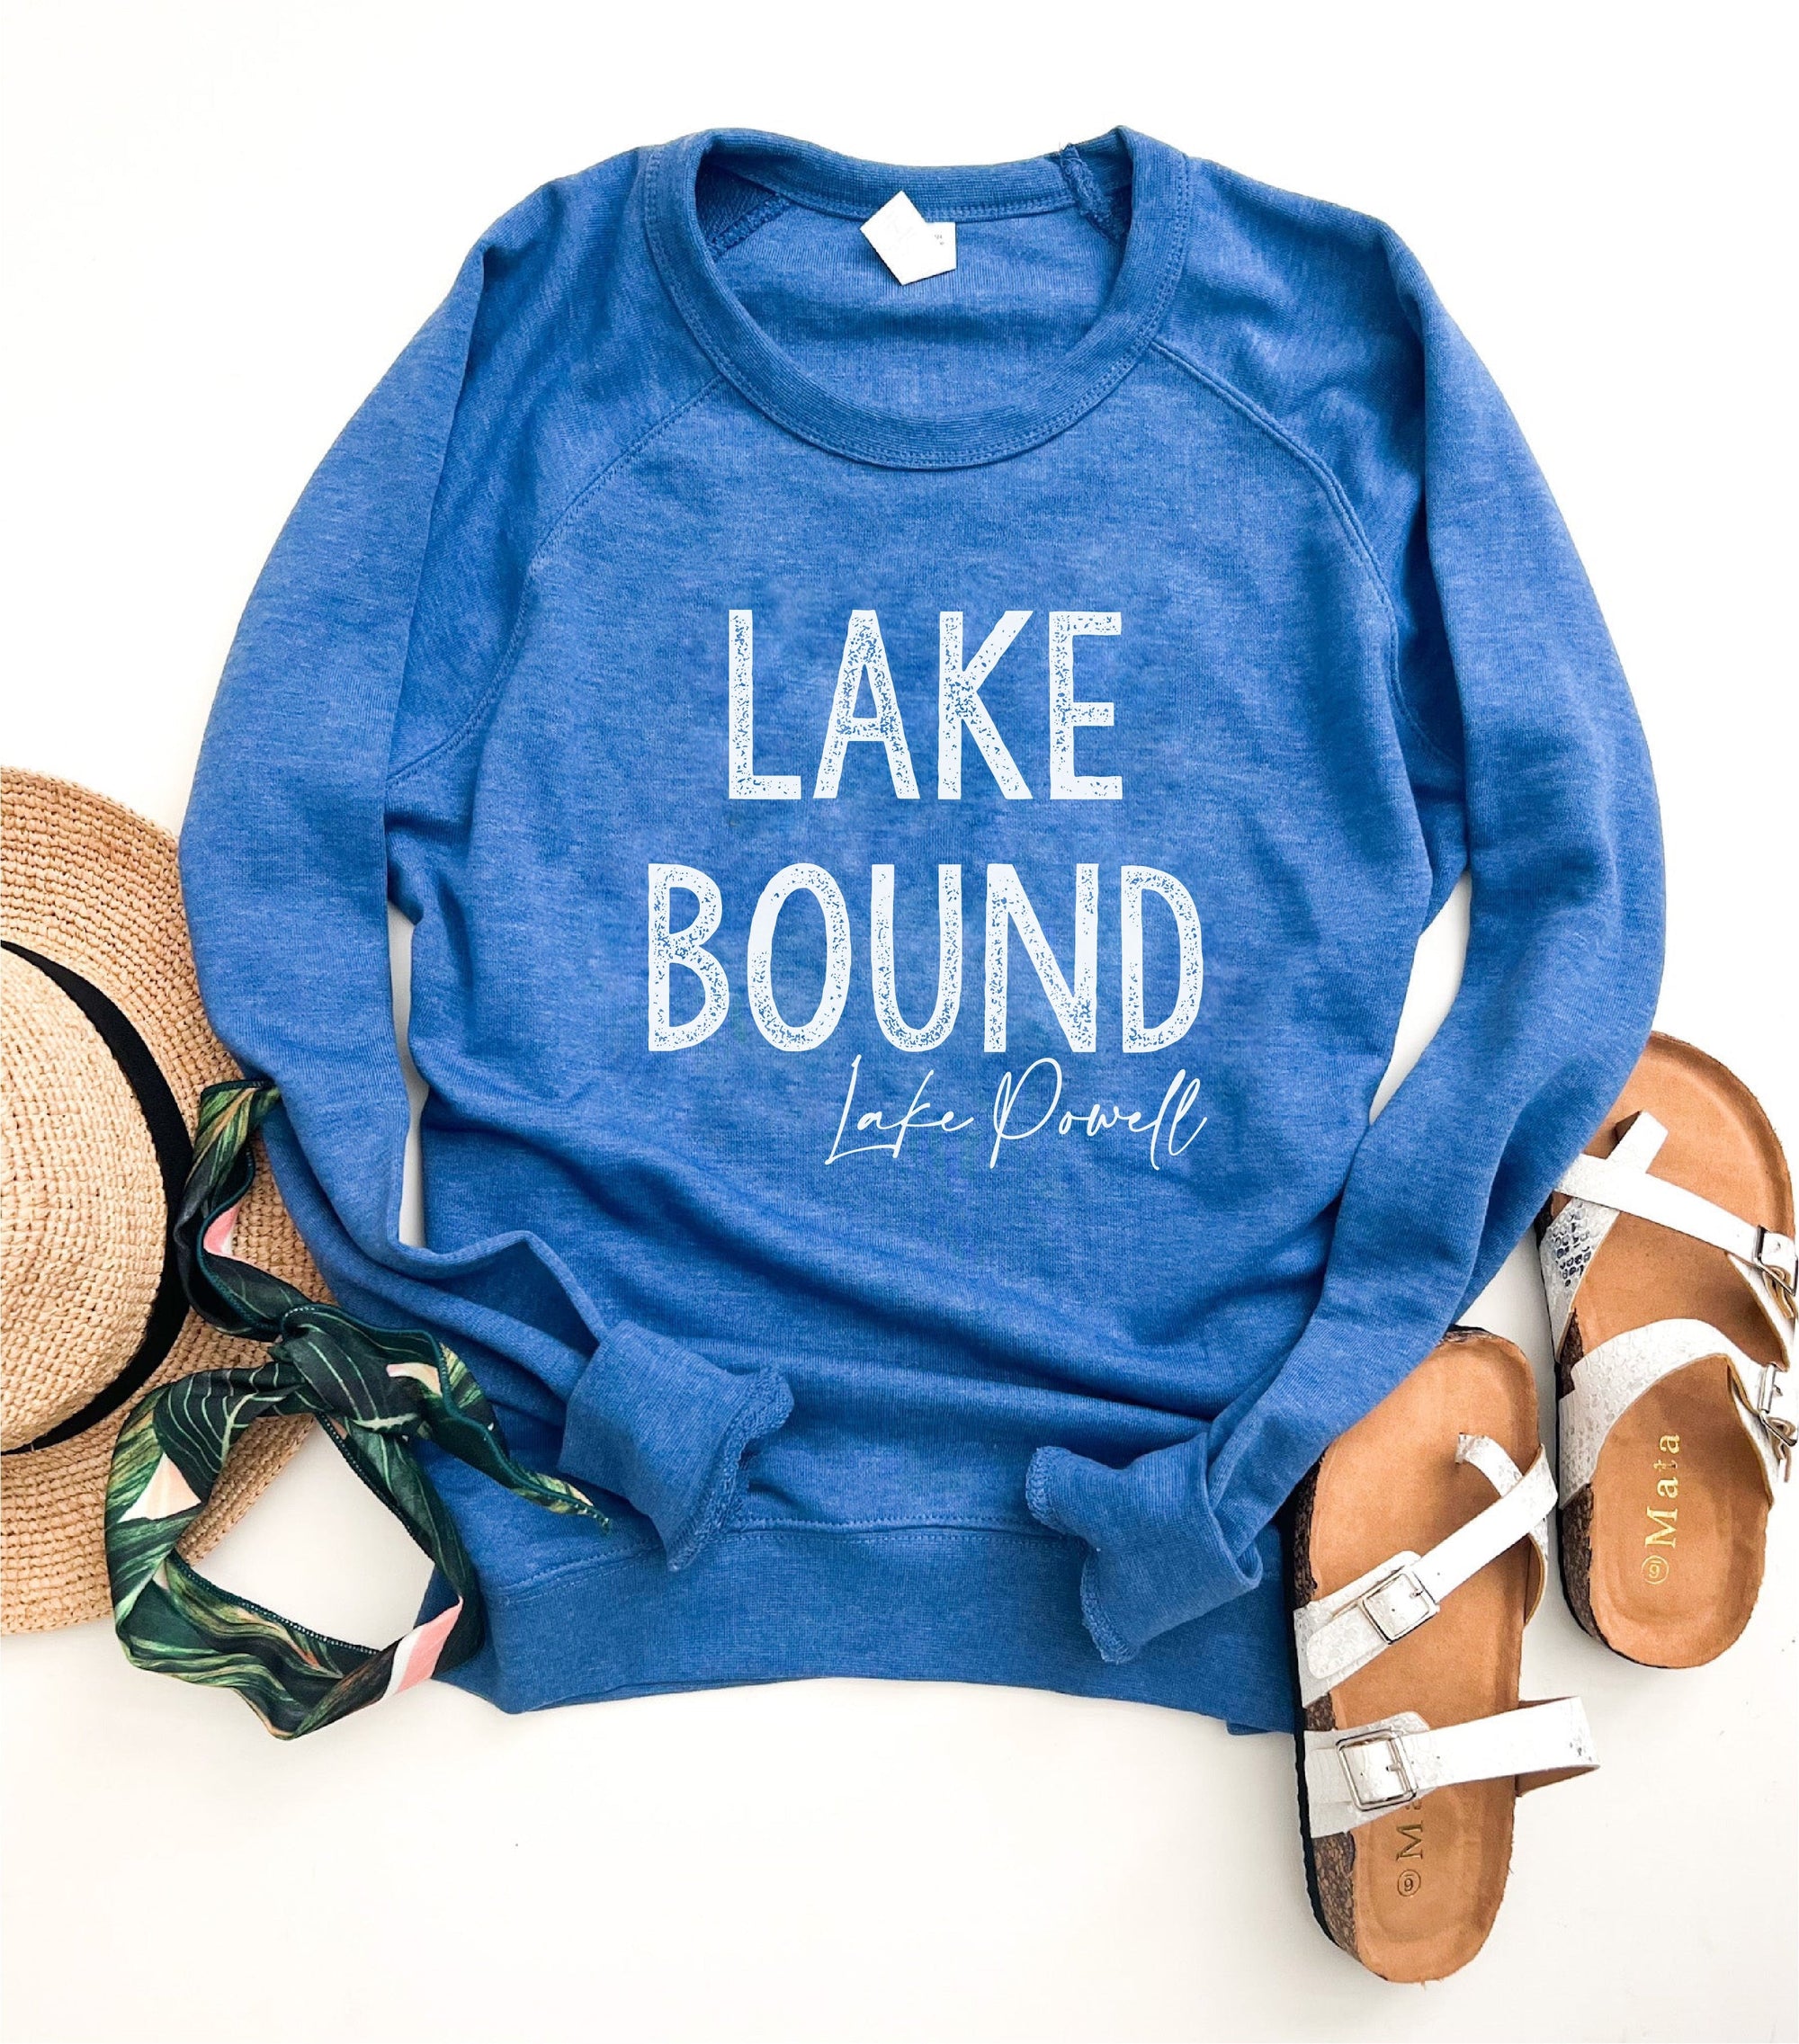 Lake Powell Lake bound french terry raglan National park collection Lane Seven French Terry 